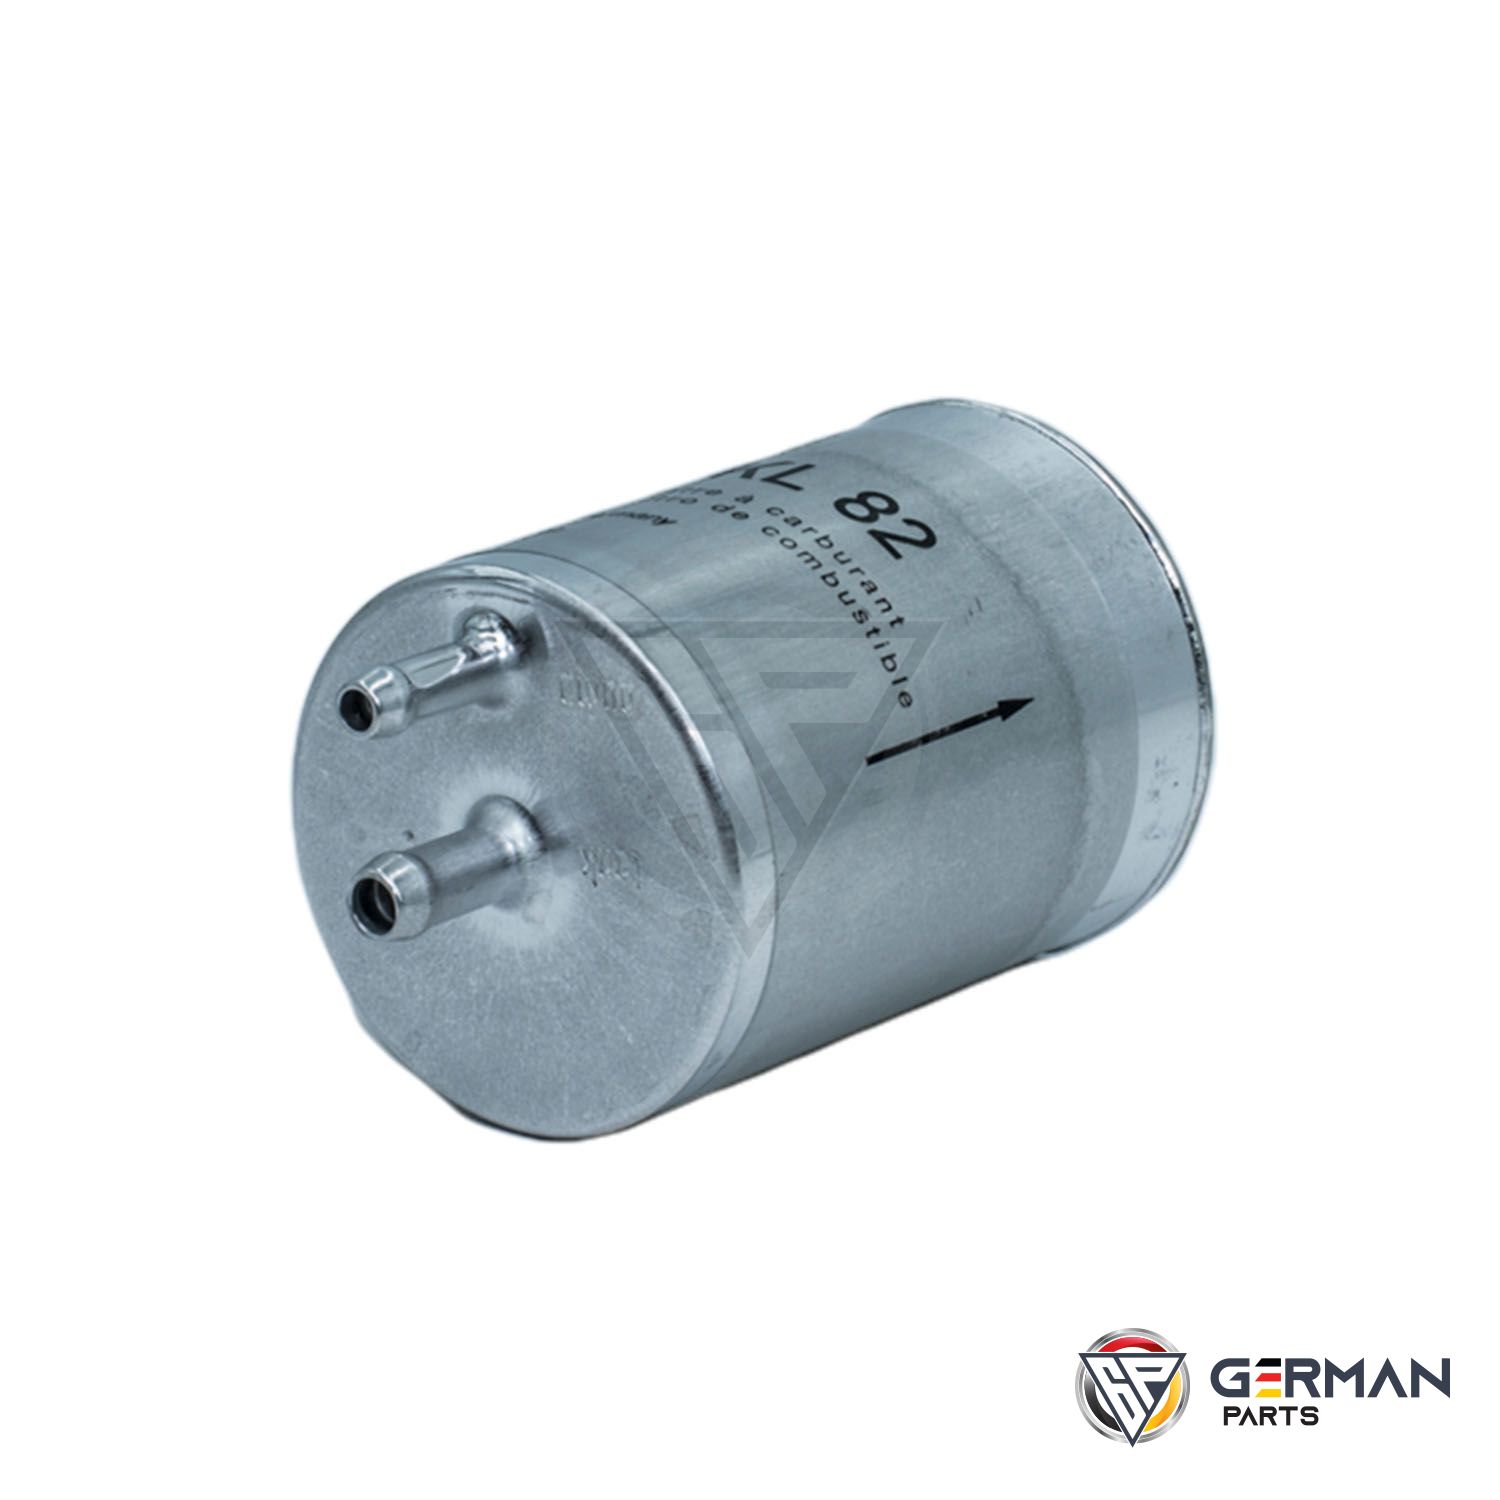 Buy Mahle Fuel Filter 0024773001 - German Parts